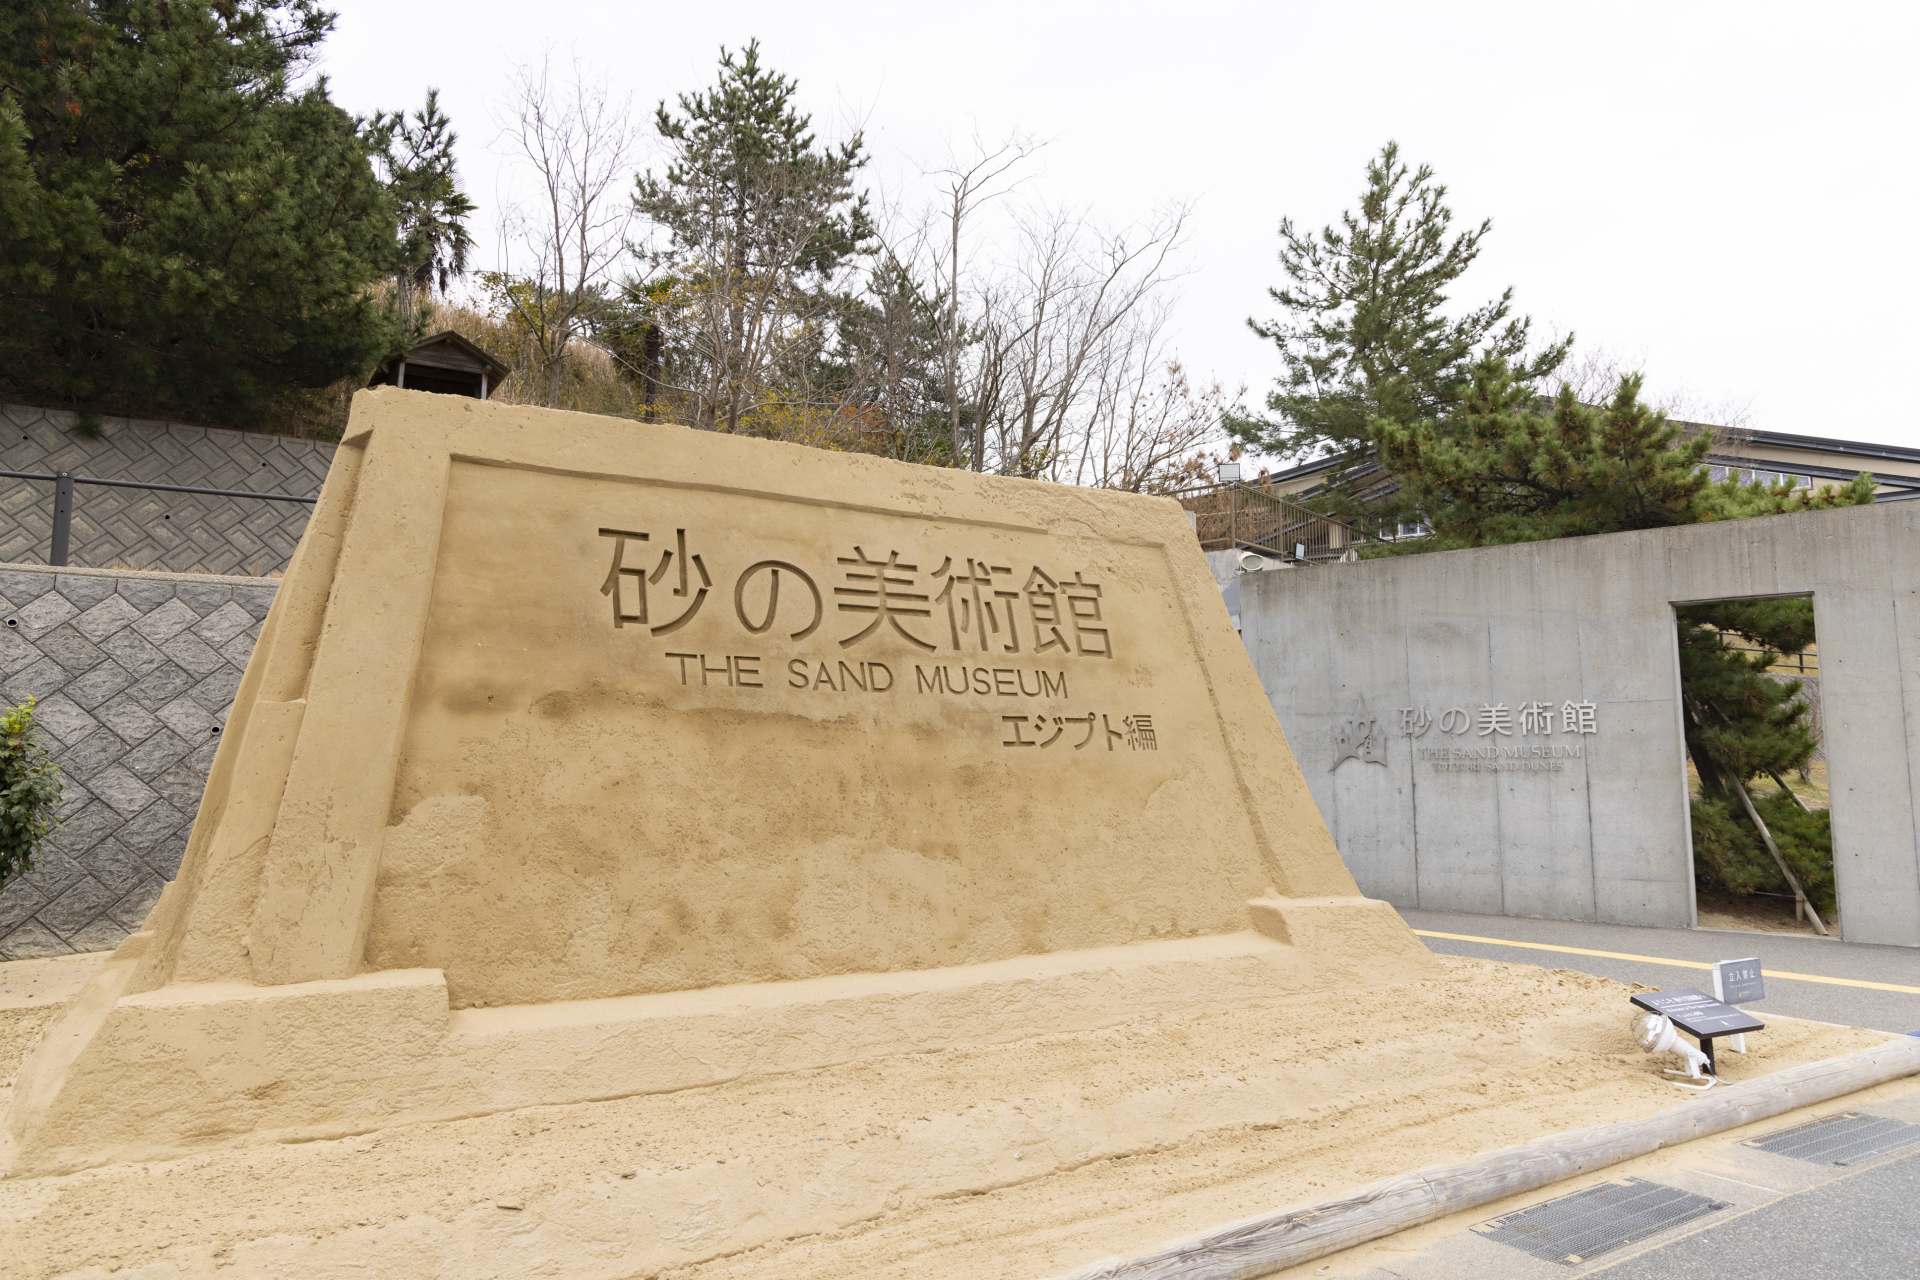 The Entrance of the Sand Museum.